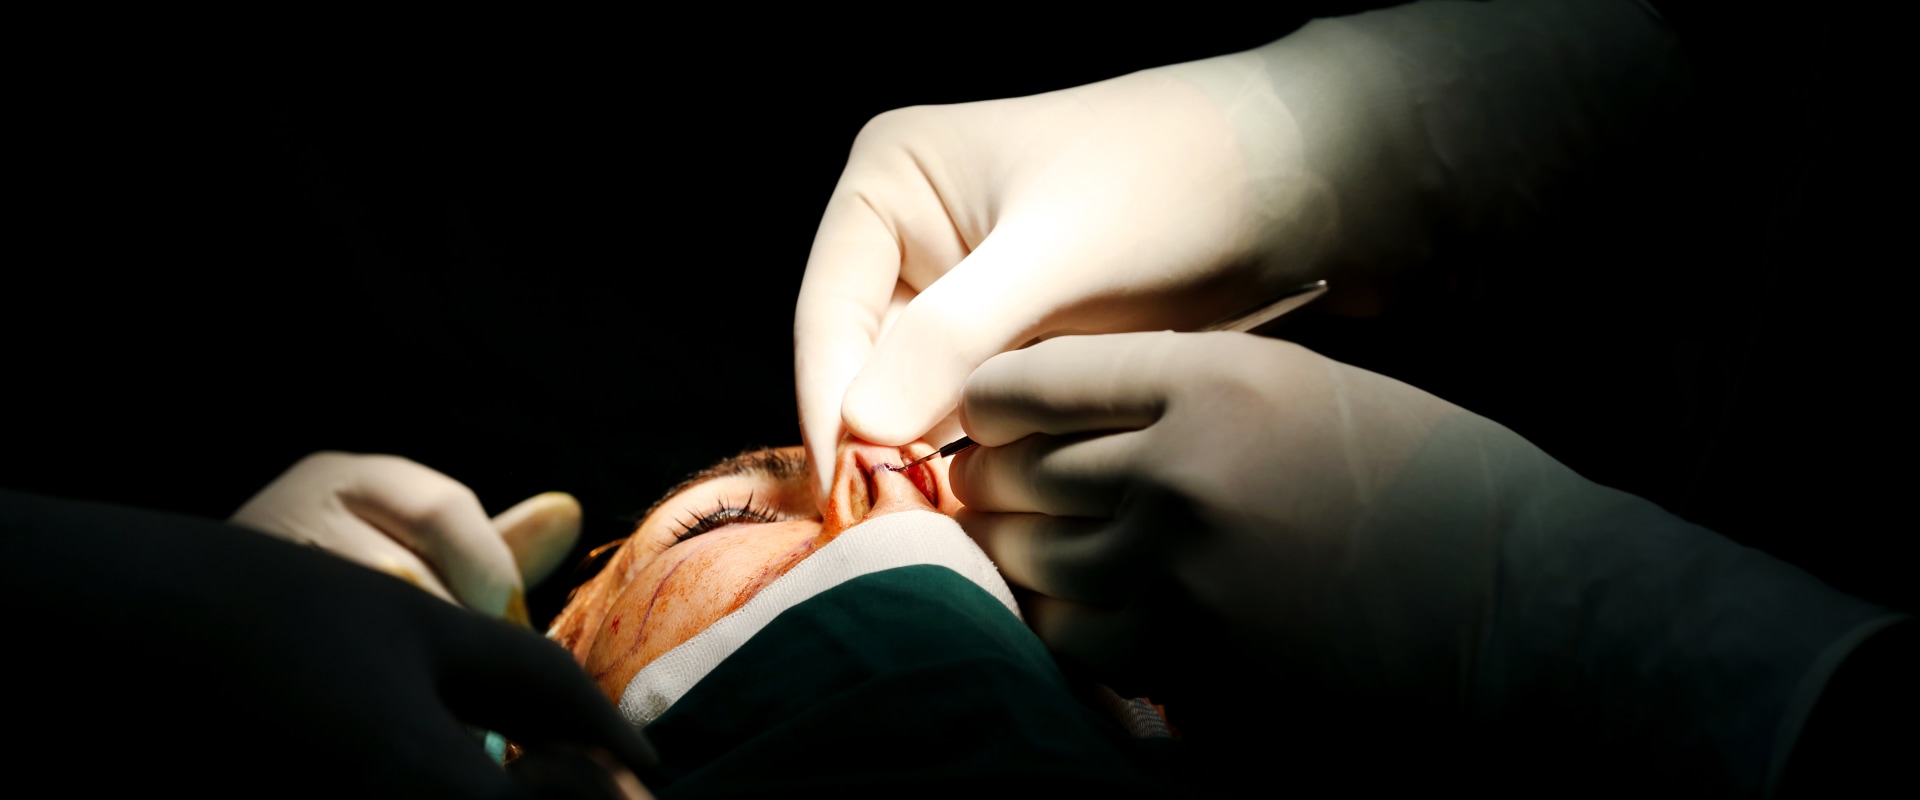 What Cosmetic Surgery Will Insurance Cover?